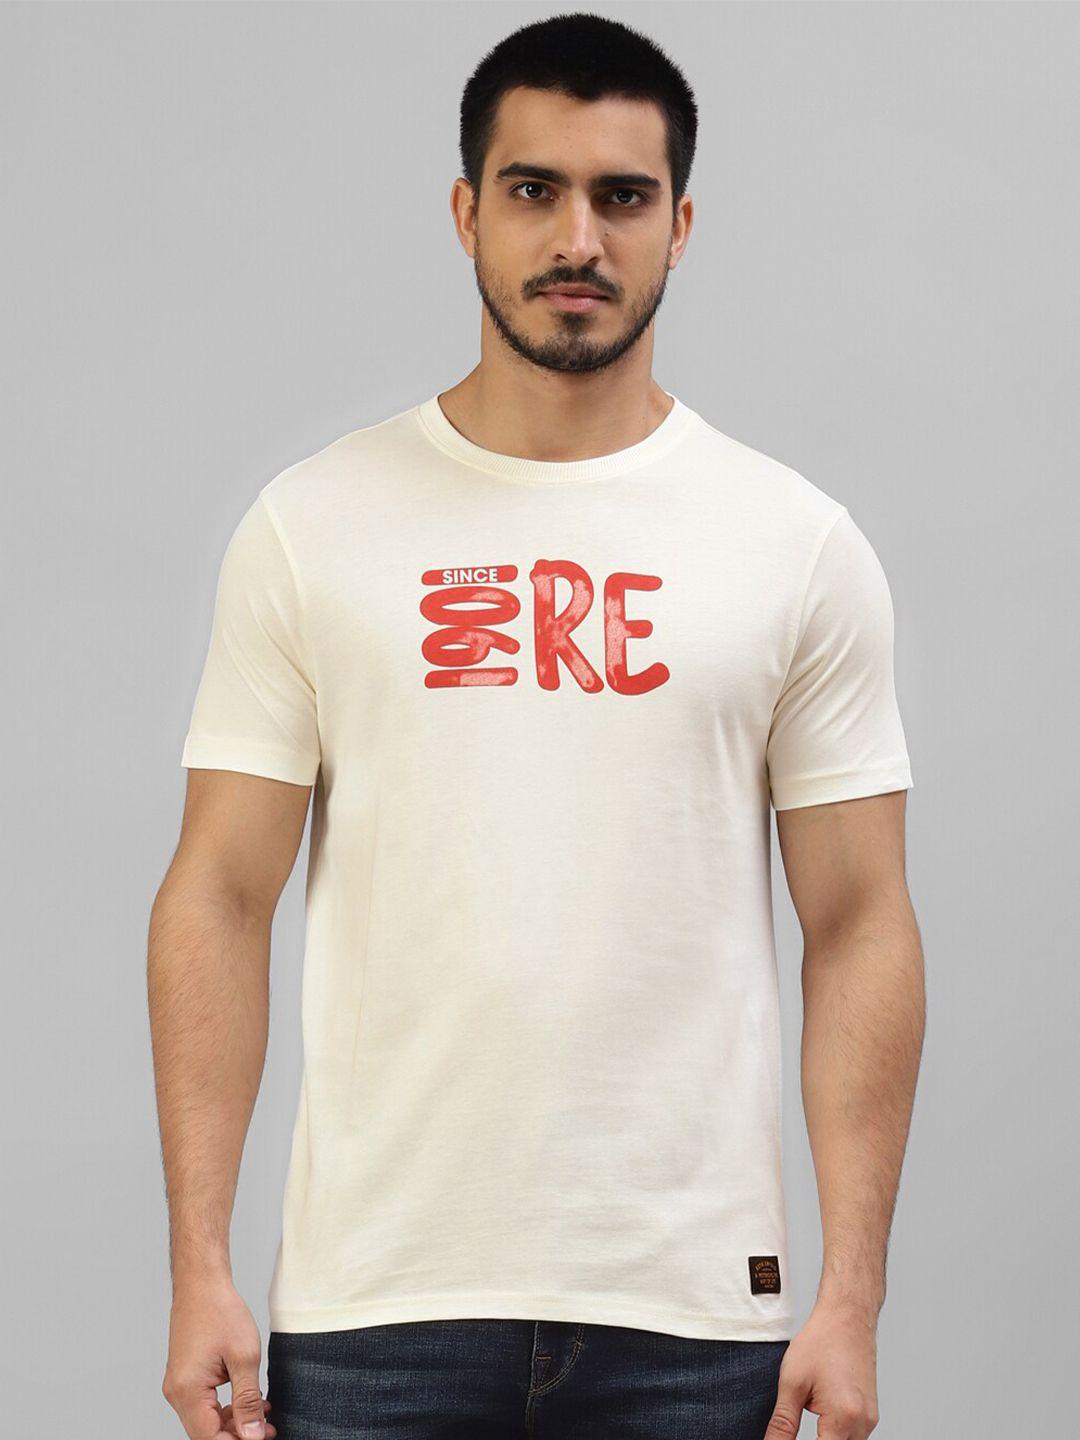 royal enfield typography printed round neck cotton casual t-shirt